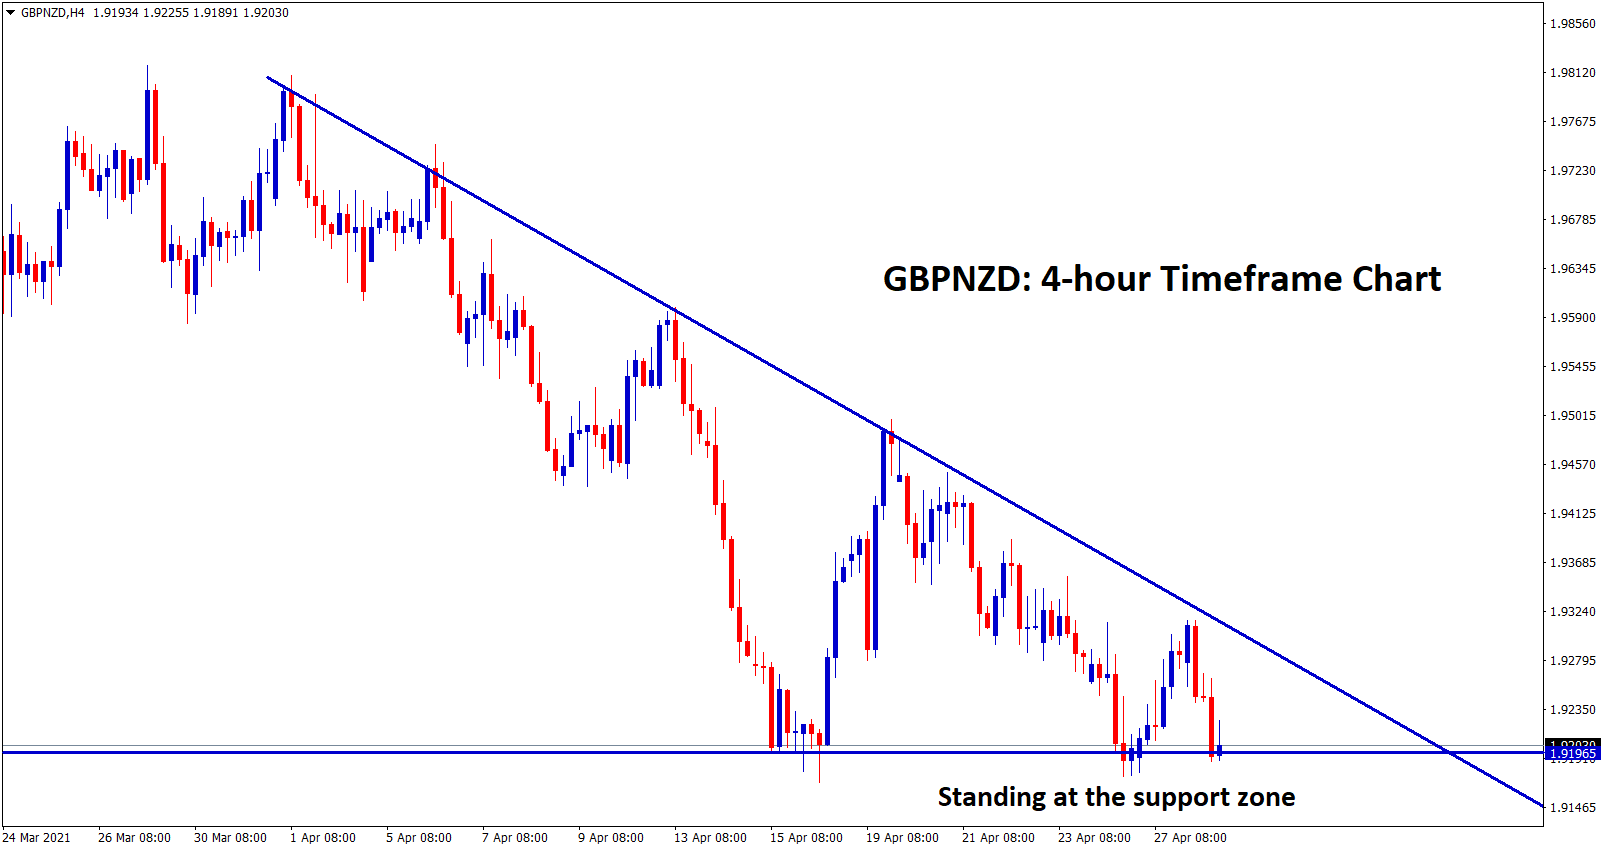 GBPNZD standing at the support zone of the descending Triangle